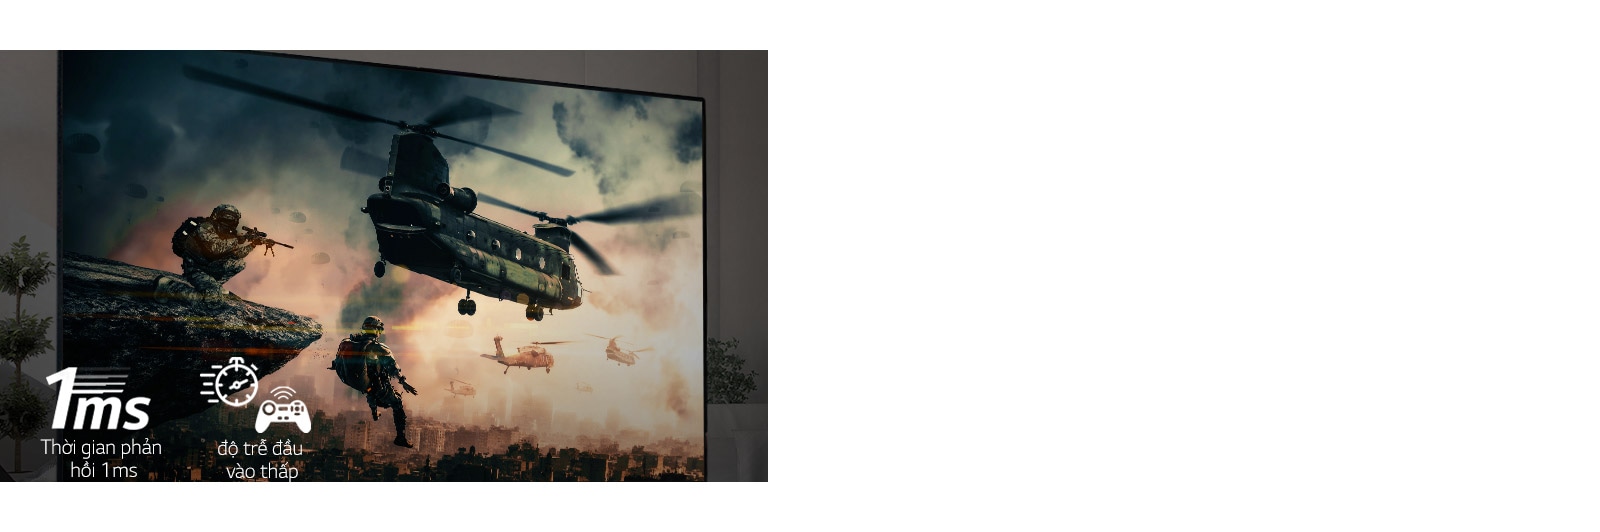 A TV screen displaying a battle game with armed soldiers and helicopters flying in the sky.